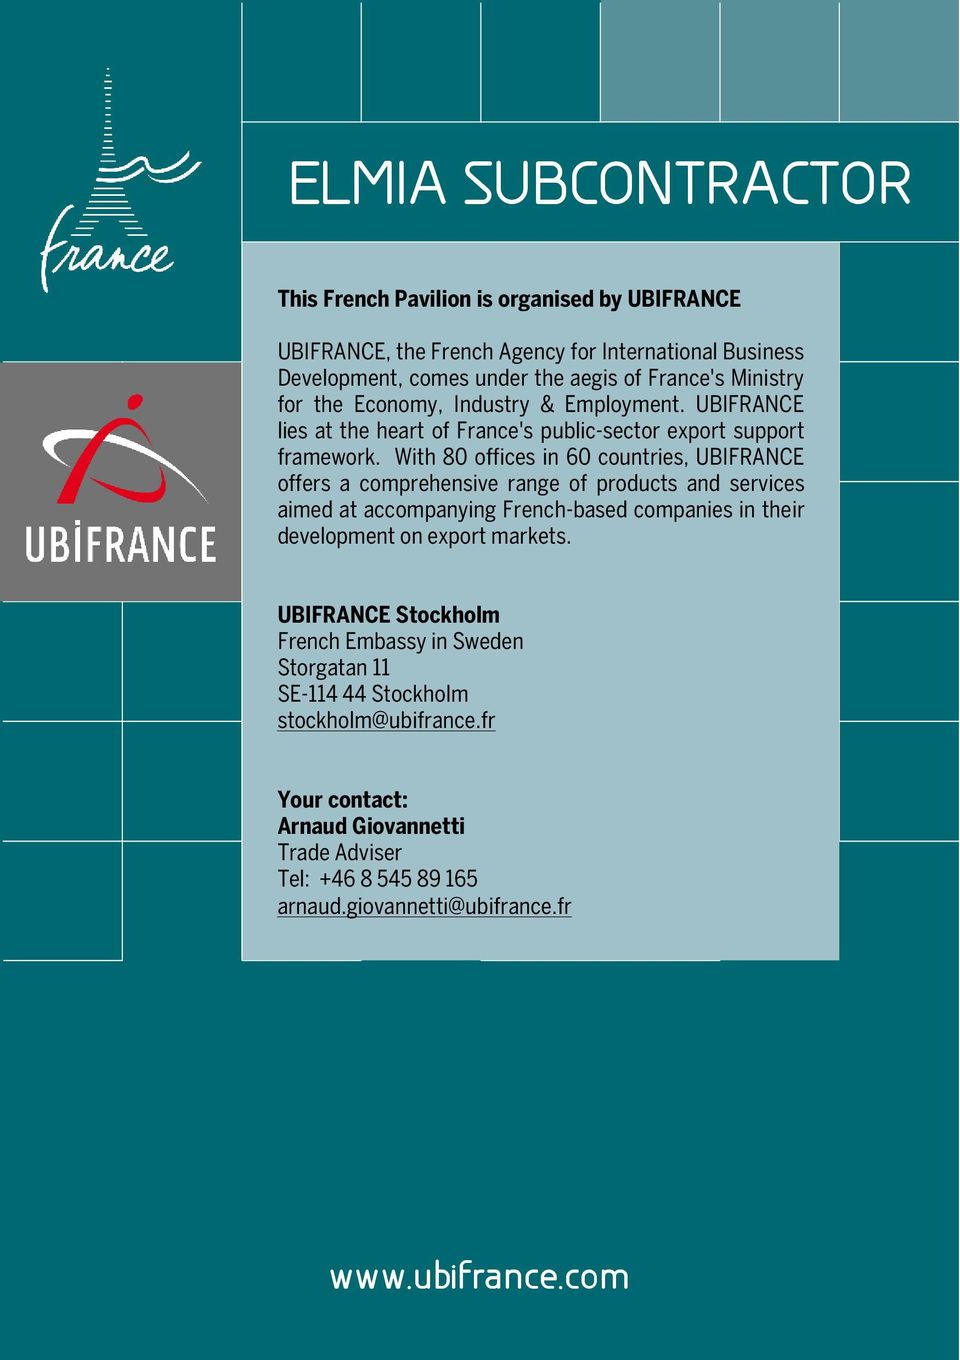 With 80 offices in 60 countries, UBIFRANCE offers a comprehensive range of products and services aimed at accompanying French-based companies in their development on export